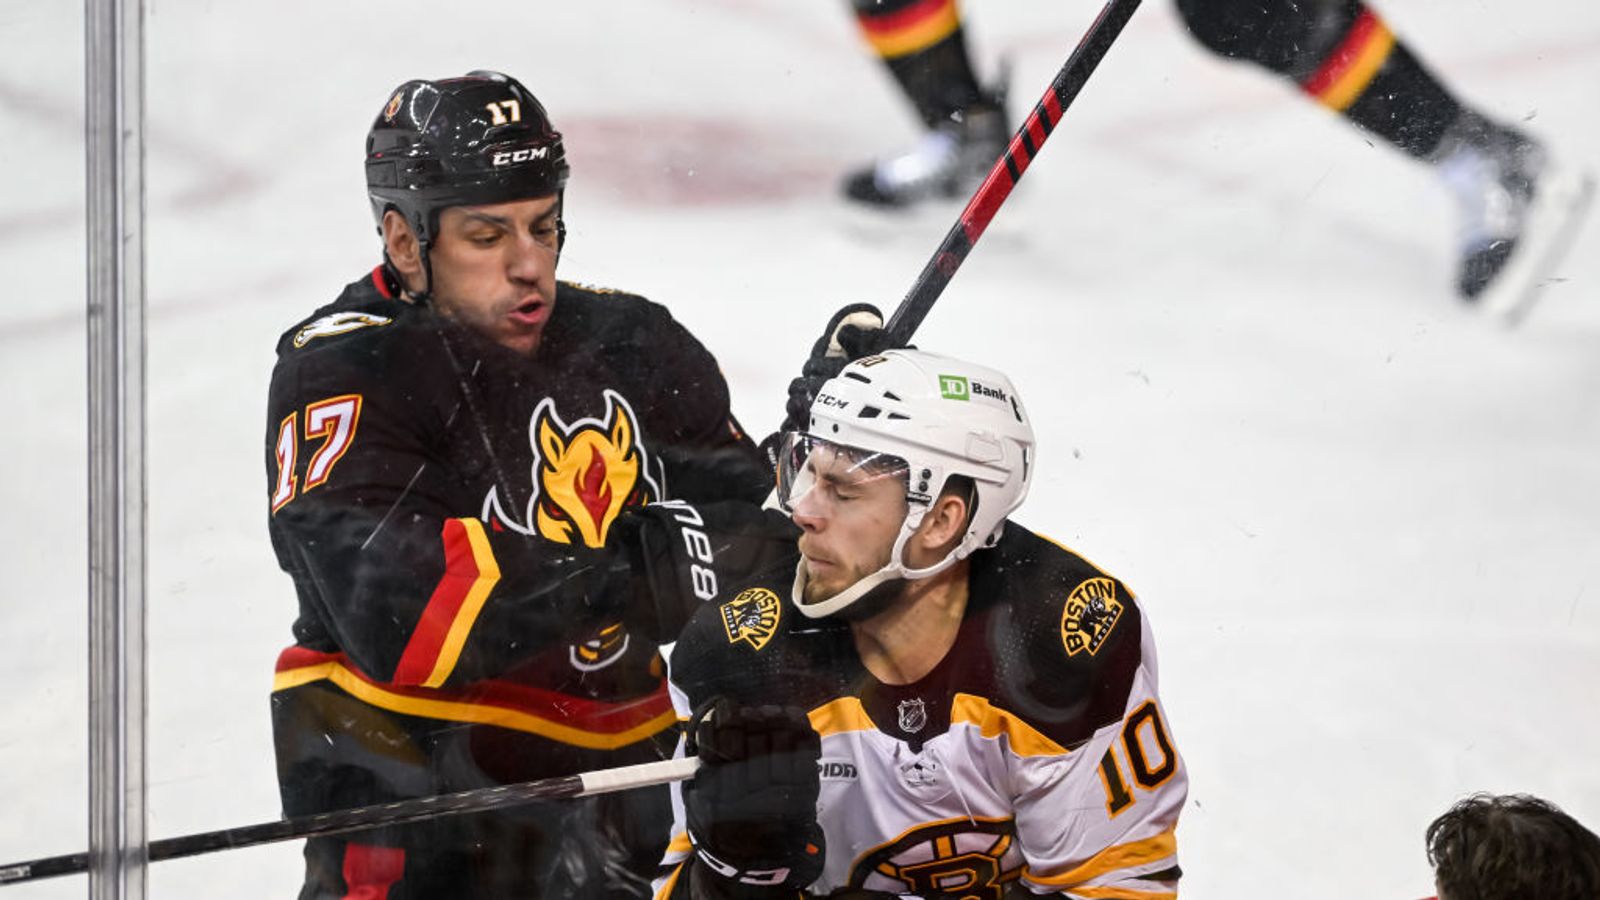 Report: Boston Bruins expected to sign Flames forward Milan Lucic as a UFA  on July 1 - FlamesNation